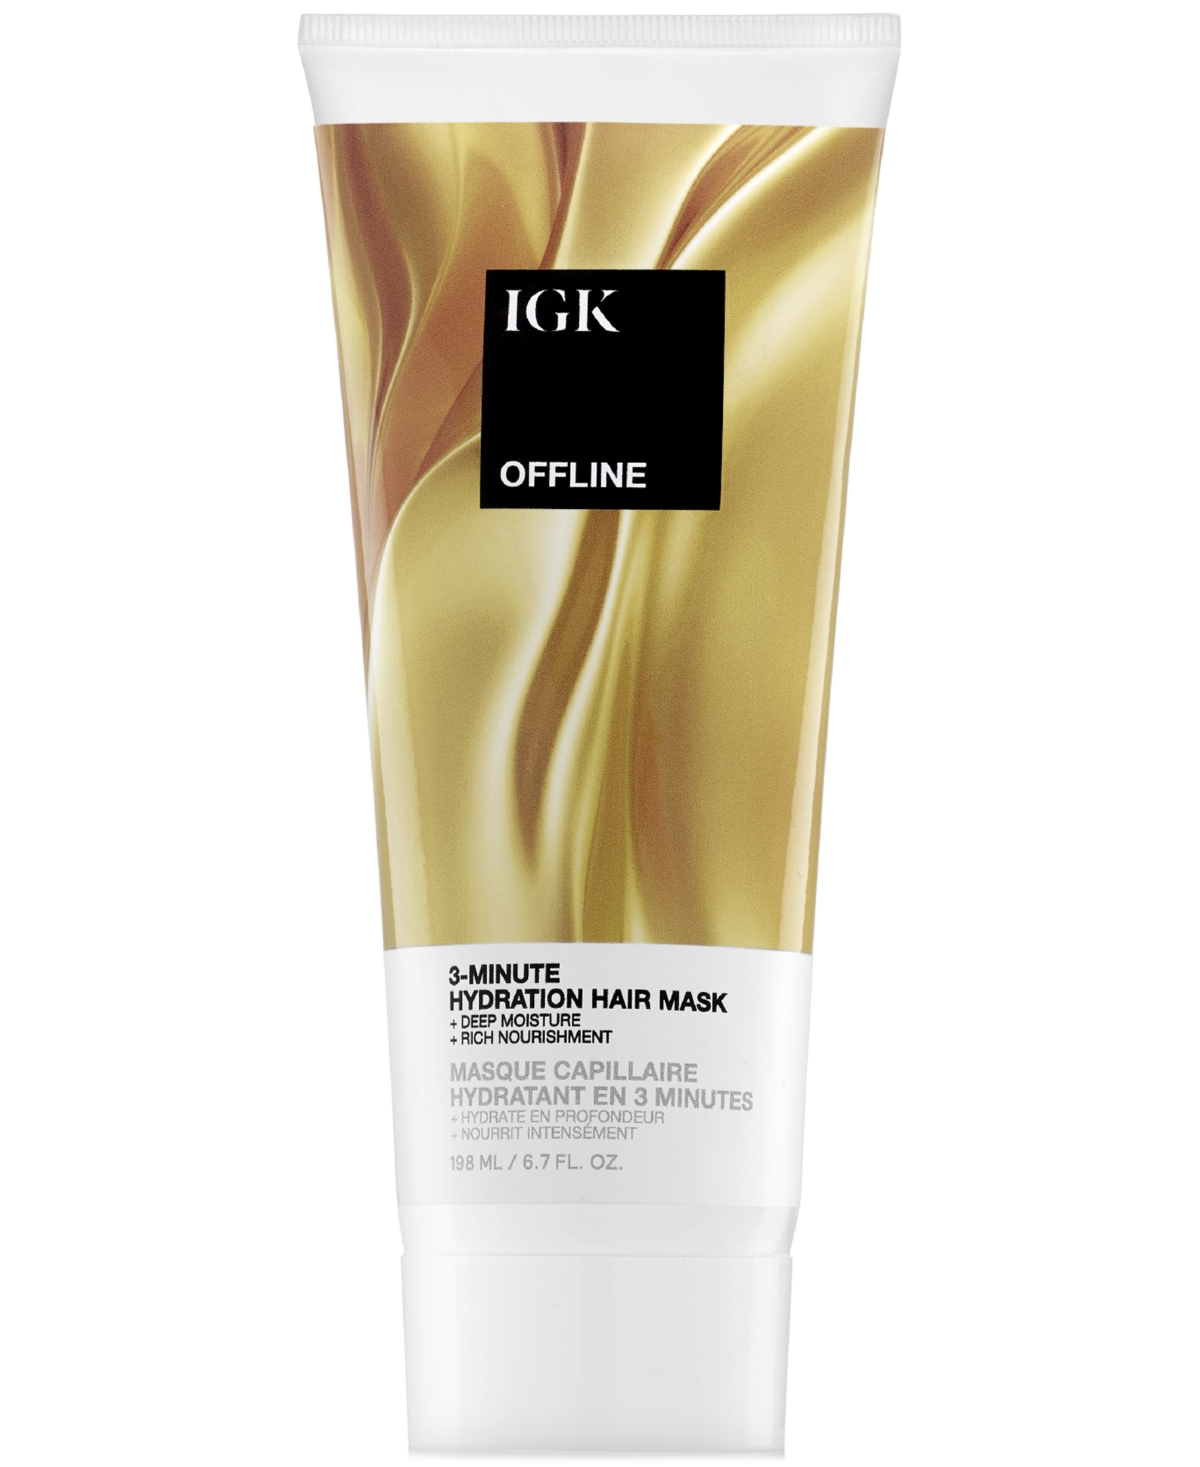 Igk Hair Offline 3-minute Hydration Hair Mask In No Color